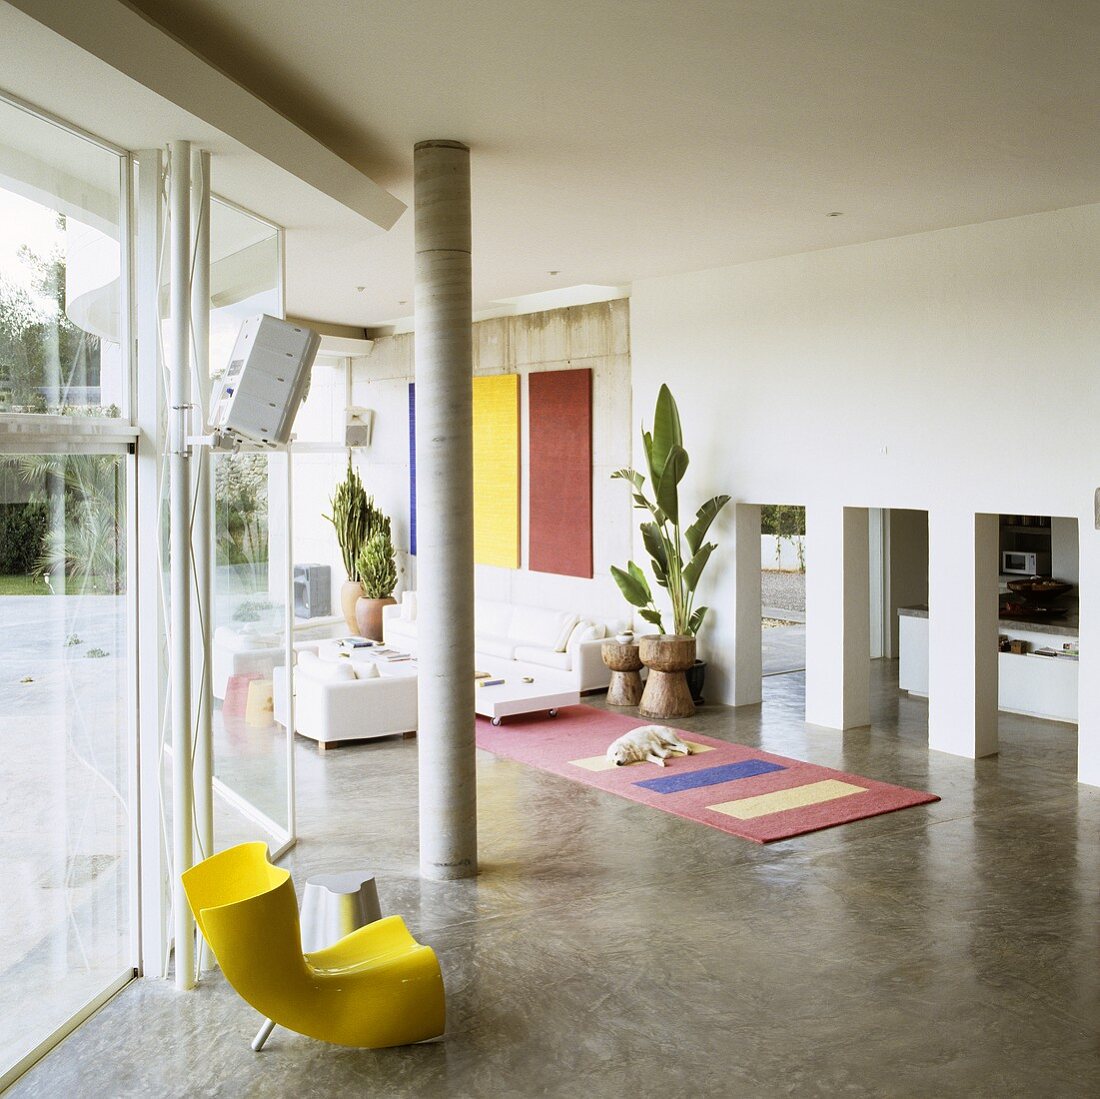 A Mediterranean house - a yellow plastic chair in front of a concrete pillar and a view through a row of arches into an open-plan living room